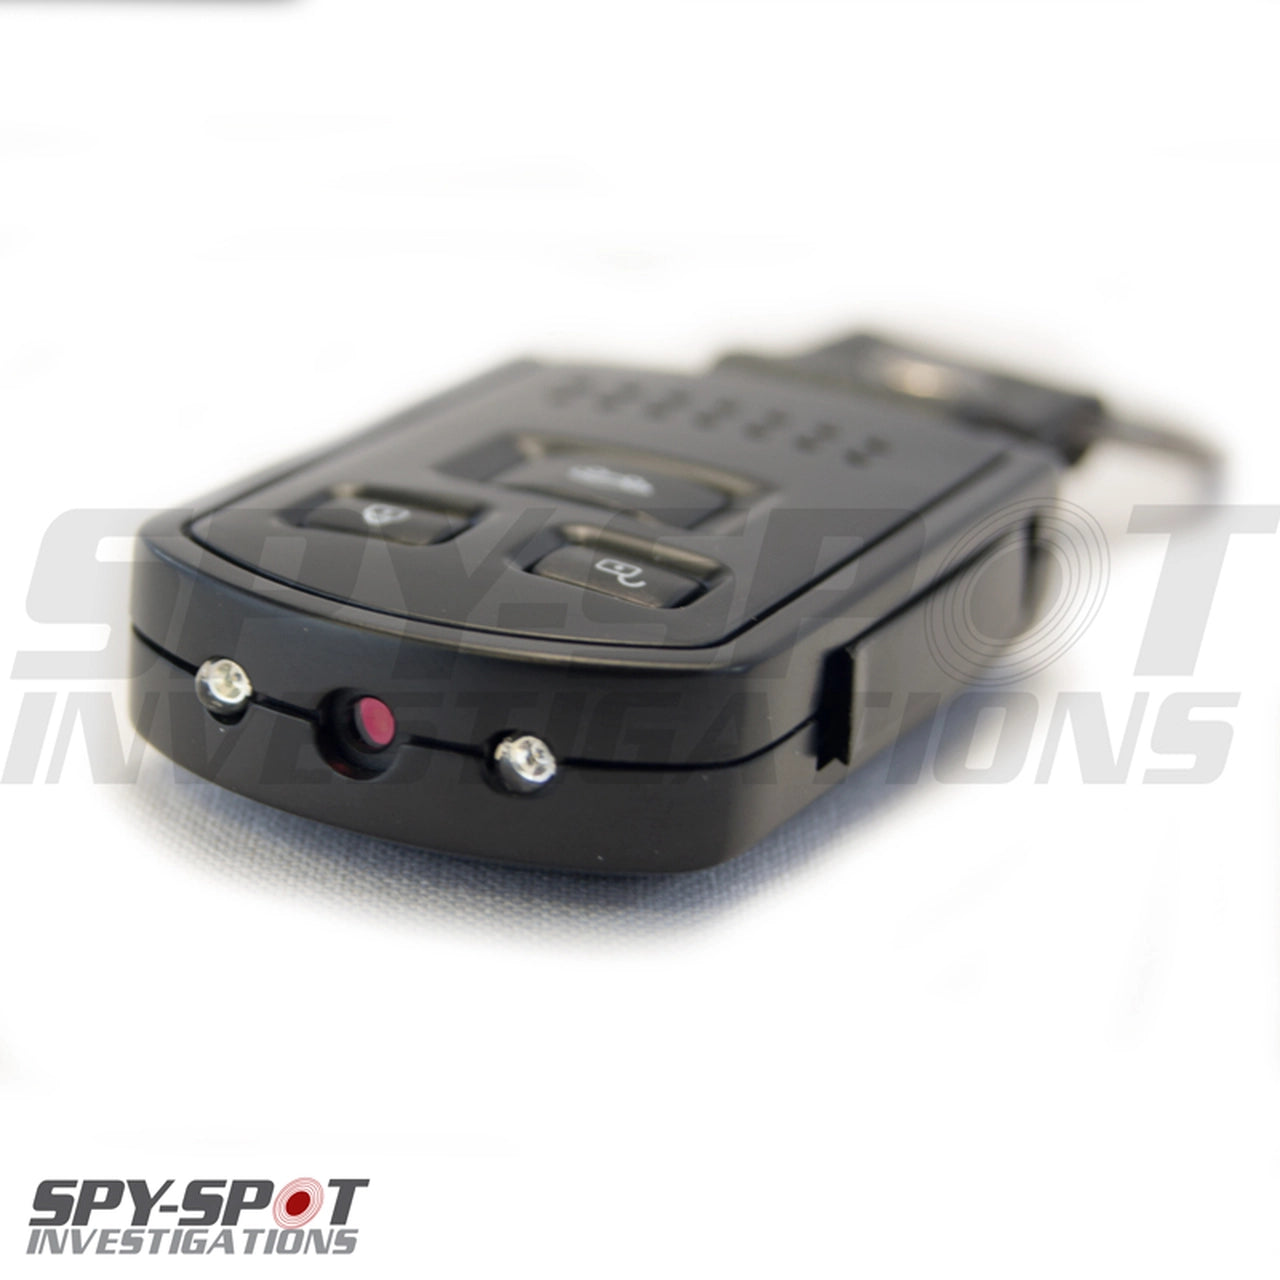 HD Keychain Video Camera with Nightvision